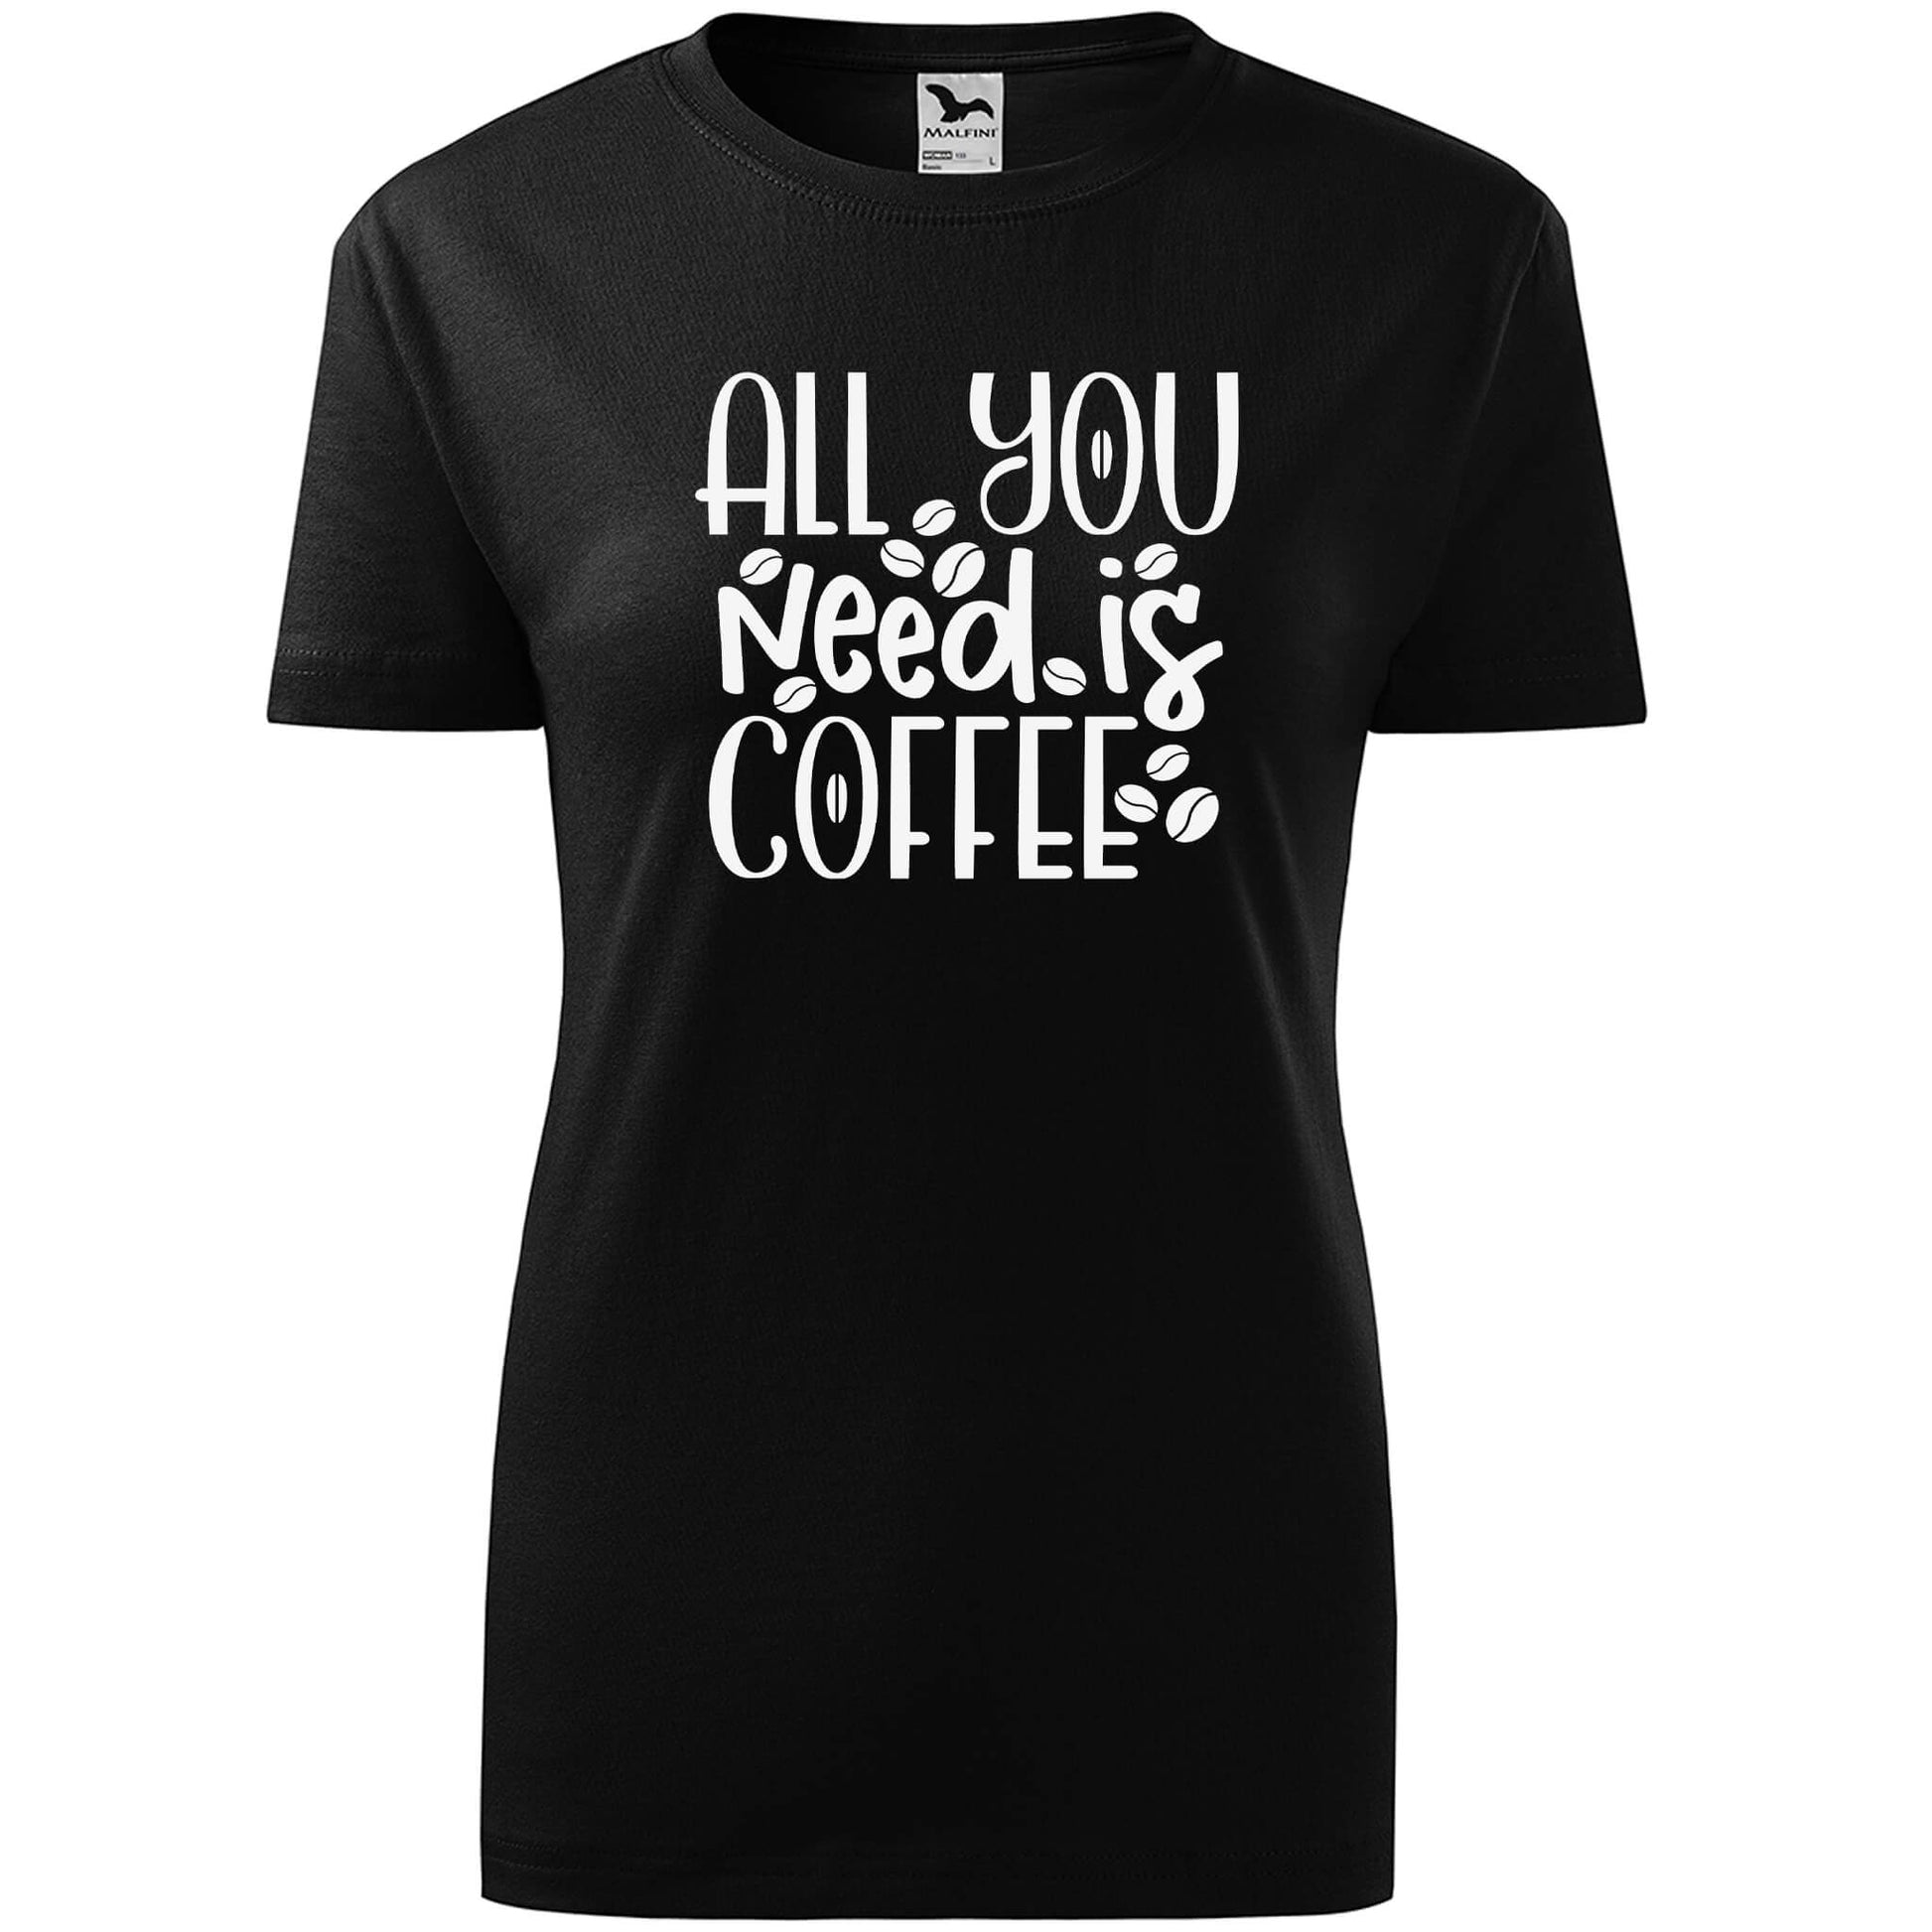 T-shirt - All you need is coffee - rvdesignprint